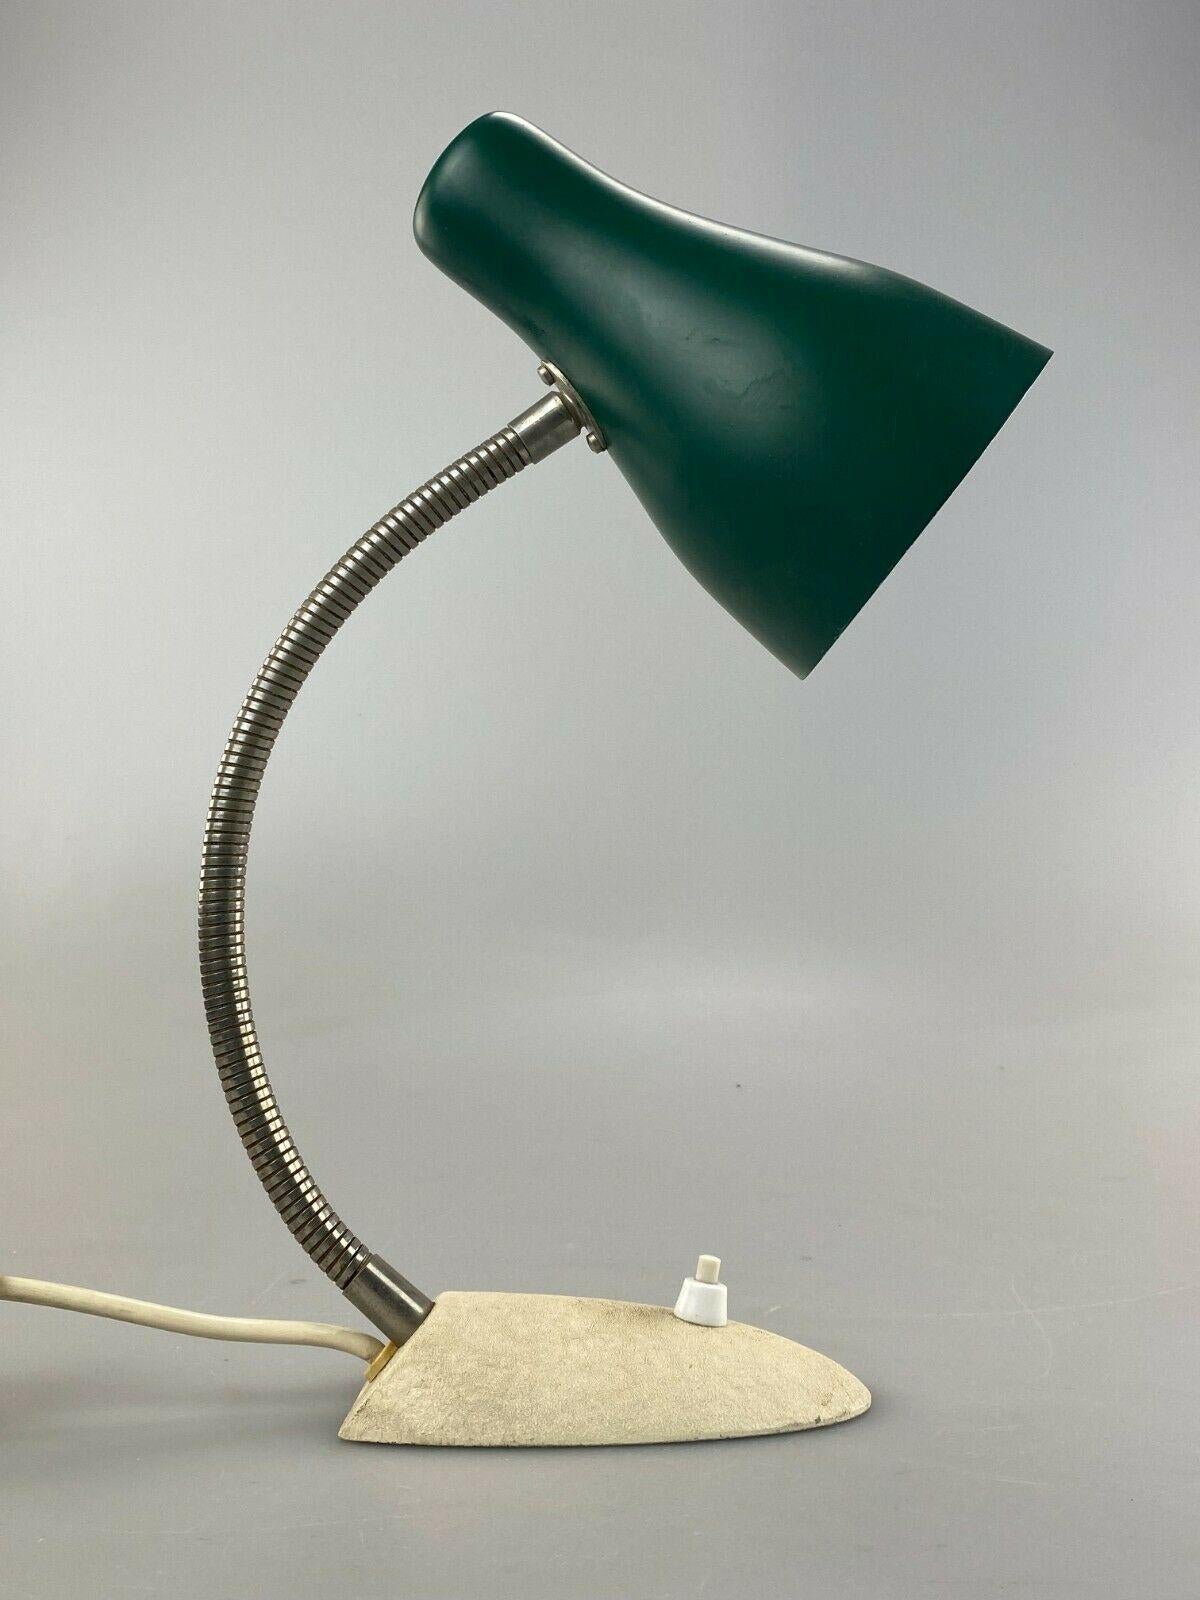 50s 60s Lamp light table lamp desk lamp Bauhaus design 60s

Object: table lamp

Manufacturer:

Condition: good

Age: around 1960-1970

Dimensions:

21cm x 11cm x 36cm

Other notes:

The pictures serve as part of the